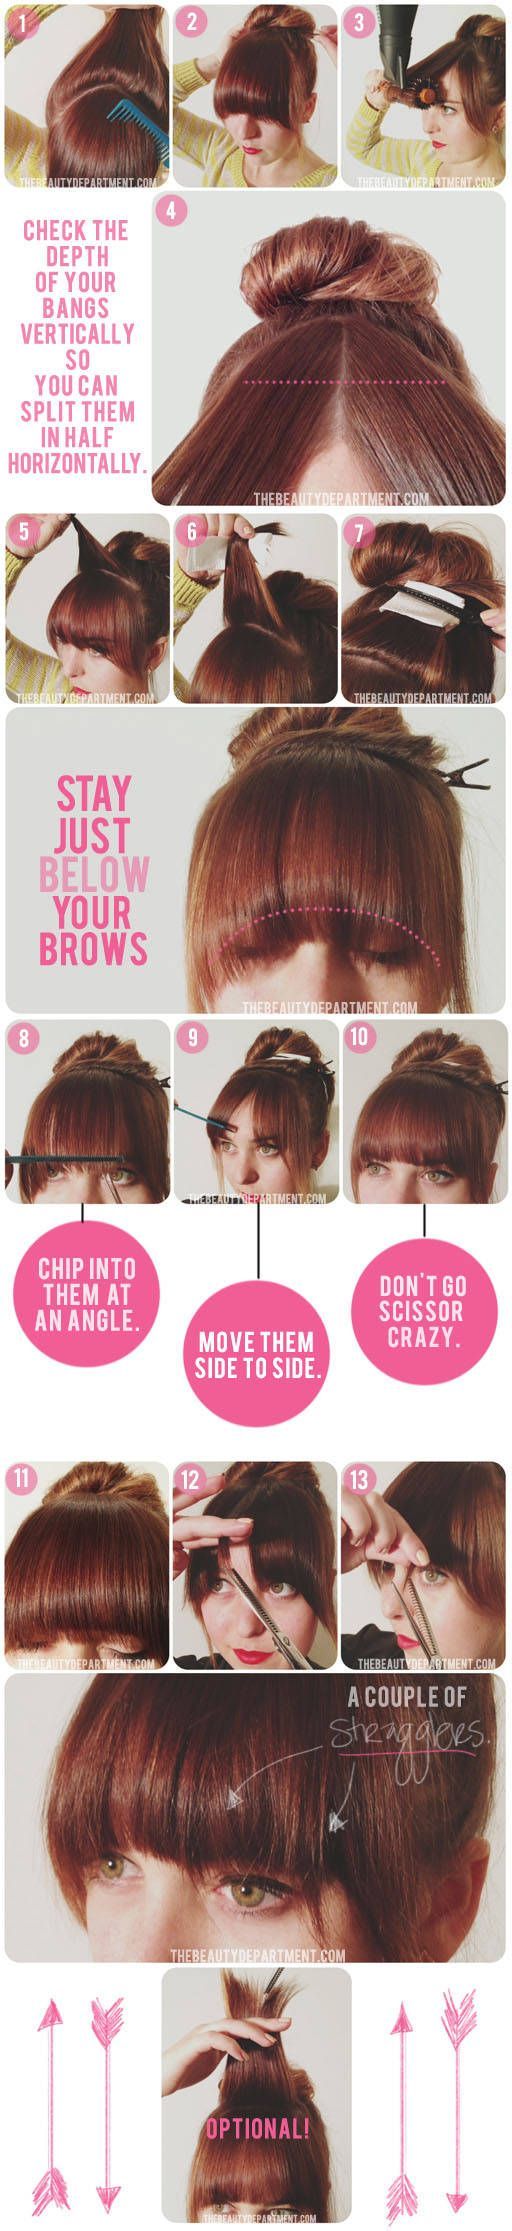 5 DIY Bang Cutting Tutorials That Will Make Messing Up Your Hair Impossible